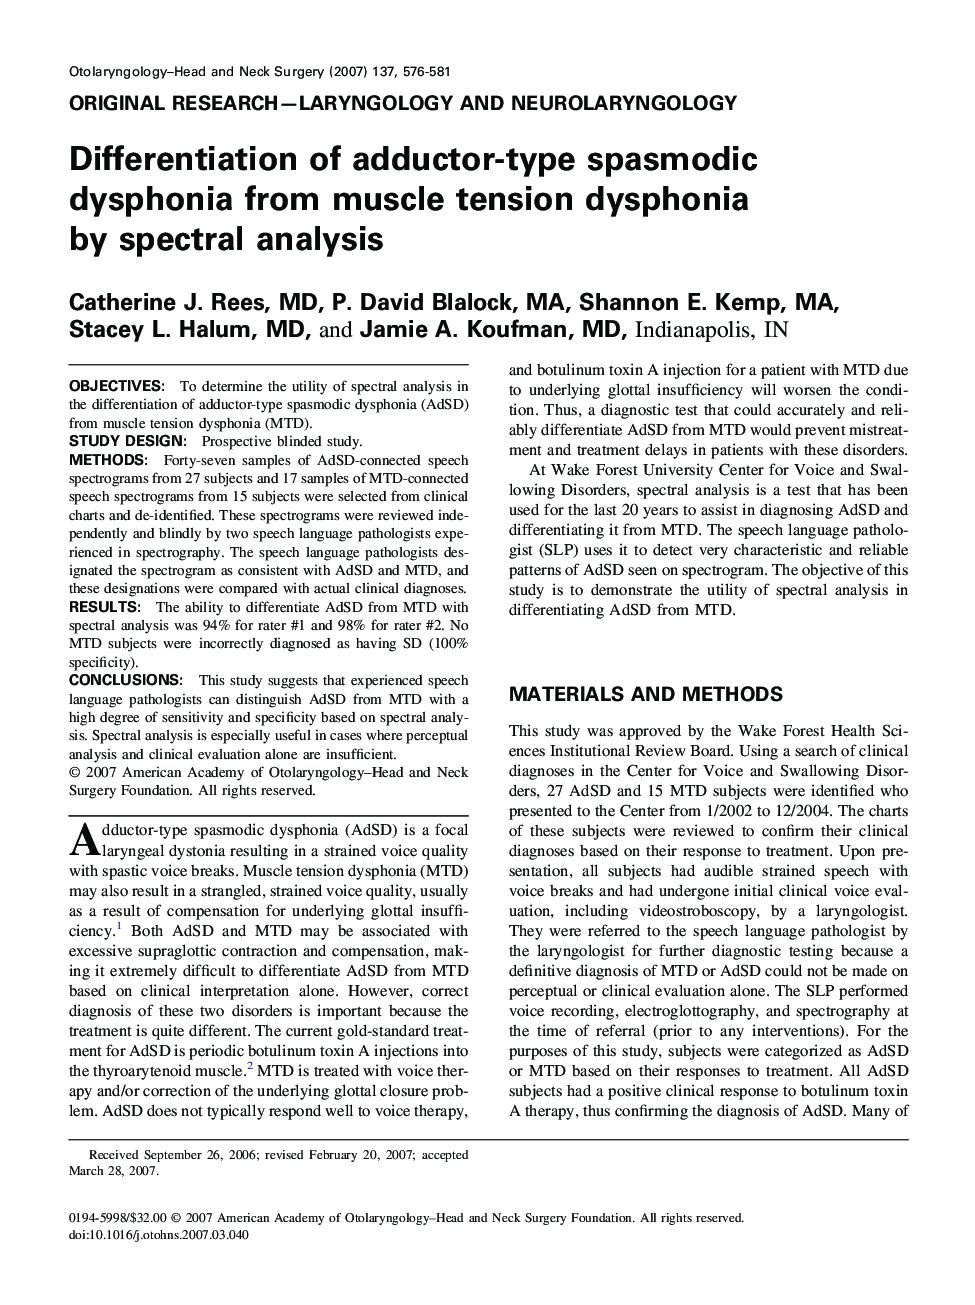 Differentiation of adductor-type spasmodic dysphonia from muscle tension dysphonia by spectral analysis